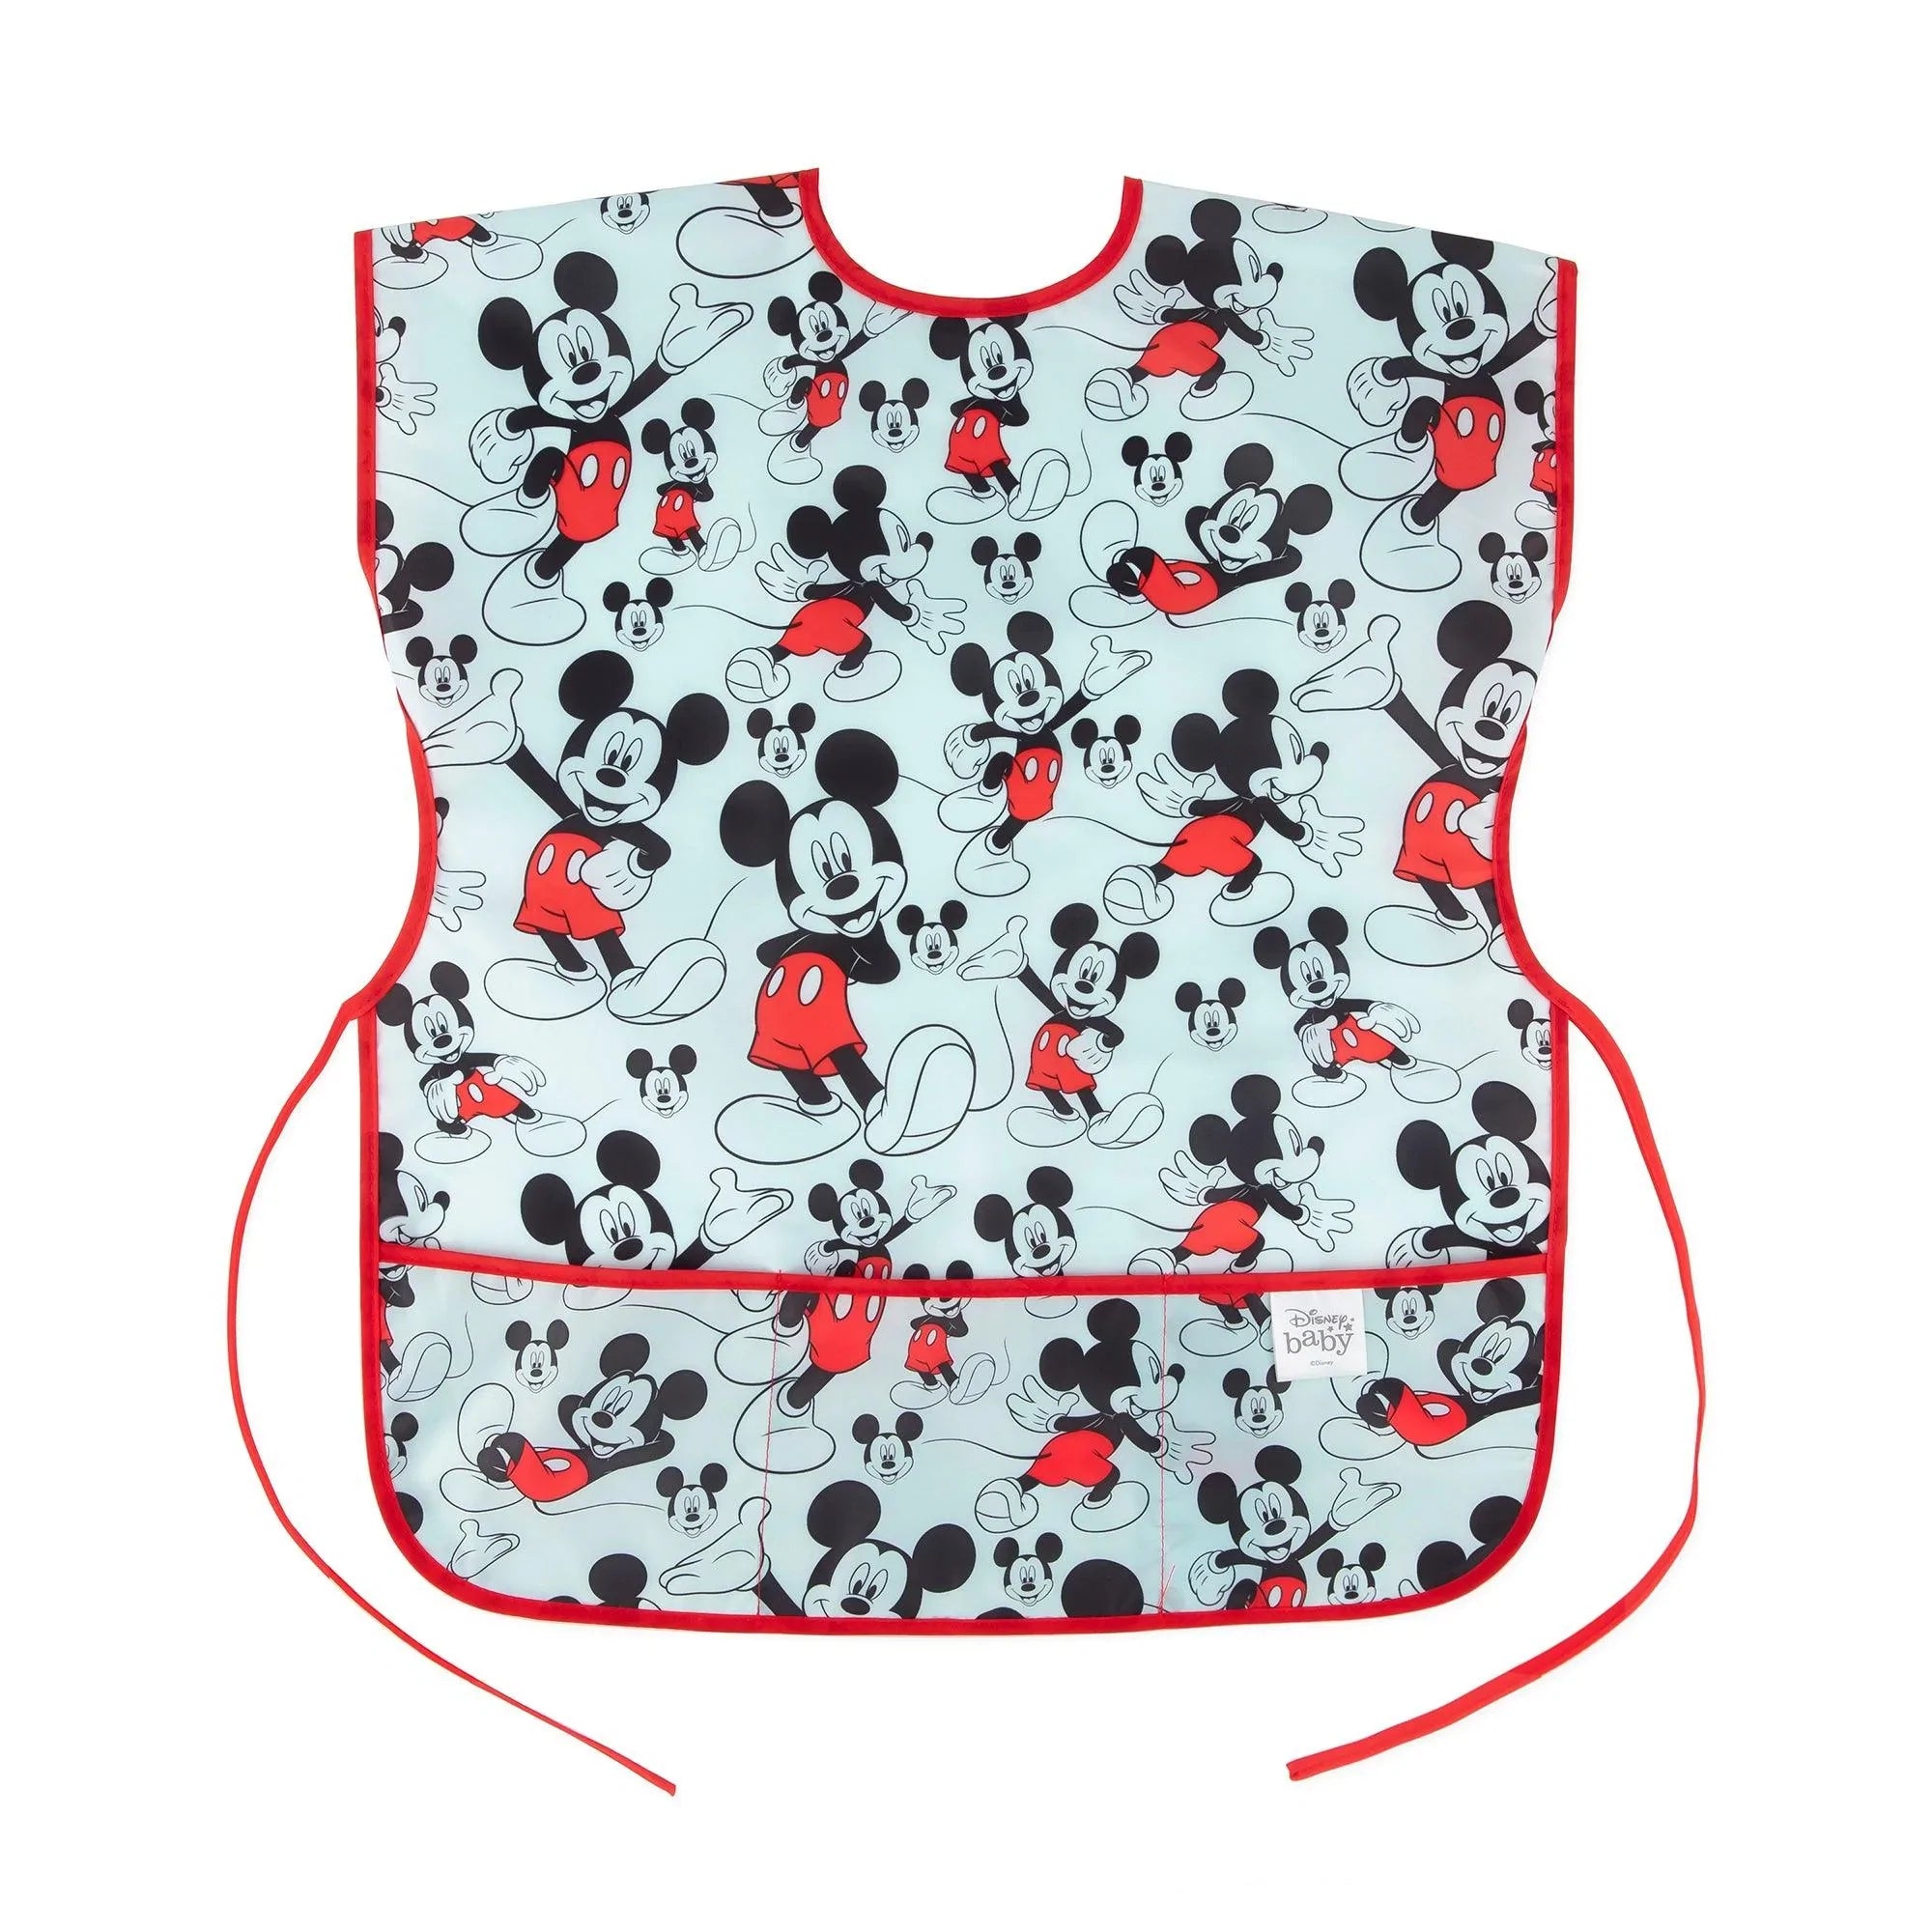 Short-Sleeved Smock: Mickey Mouse Classic - Bumkins